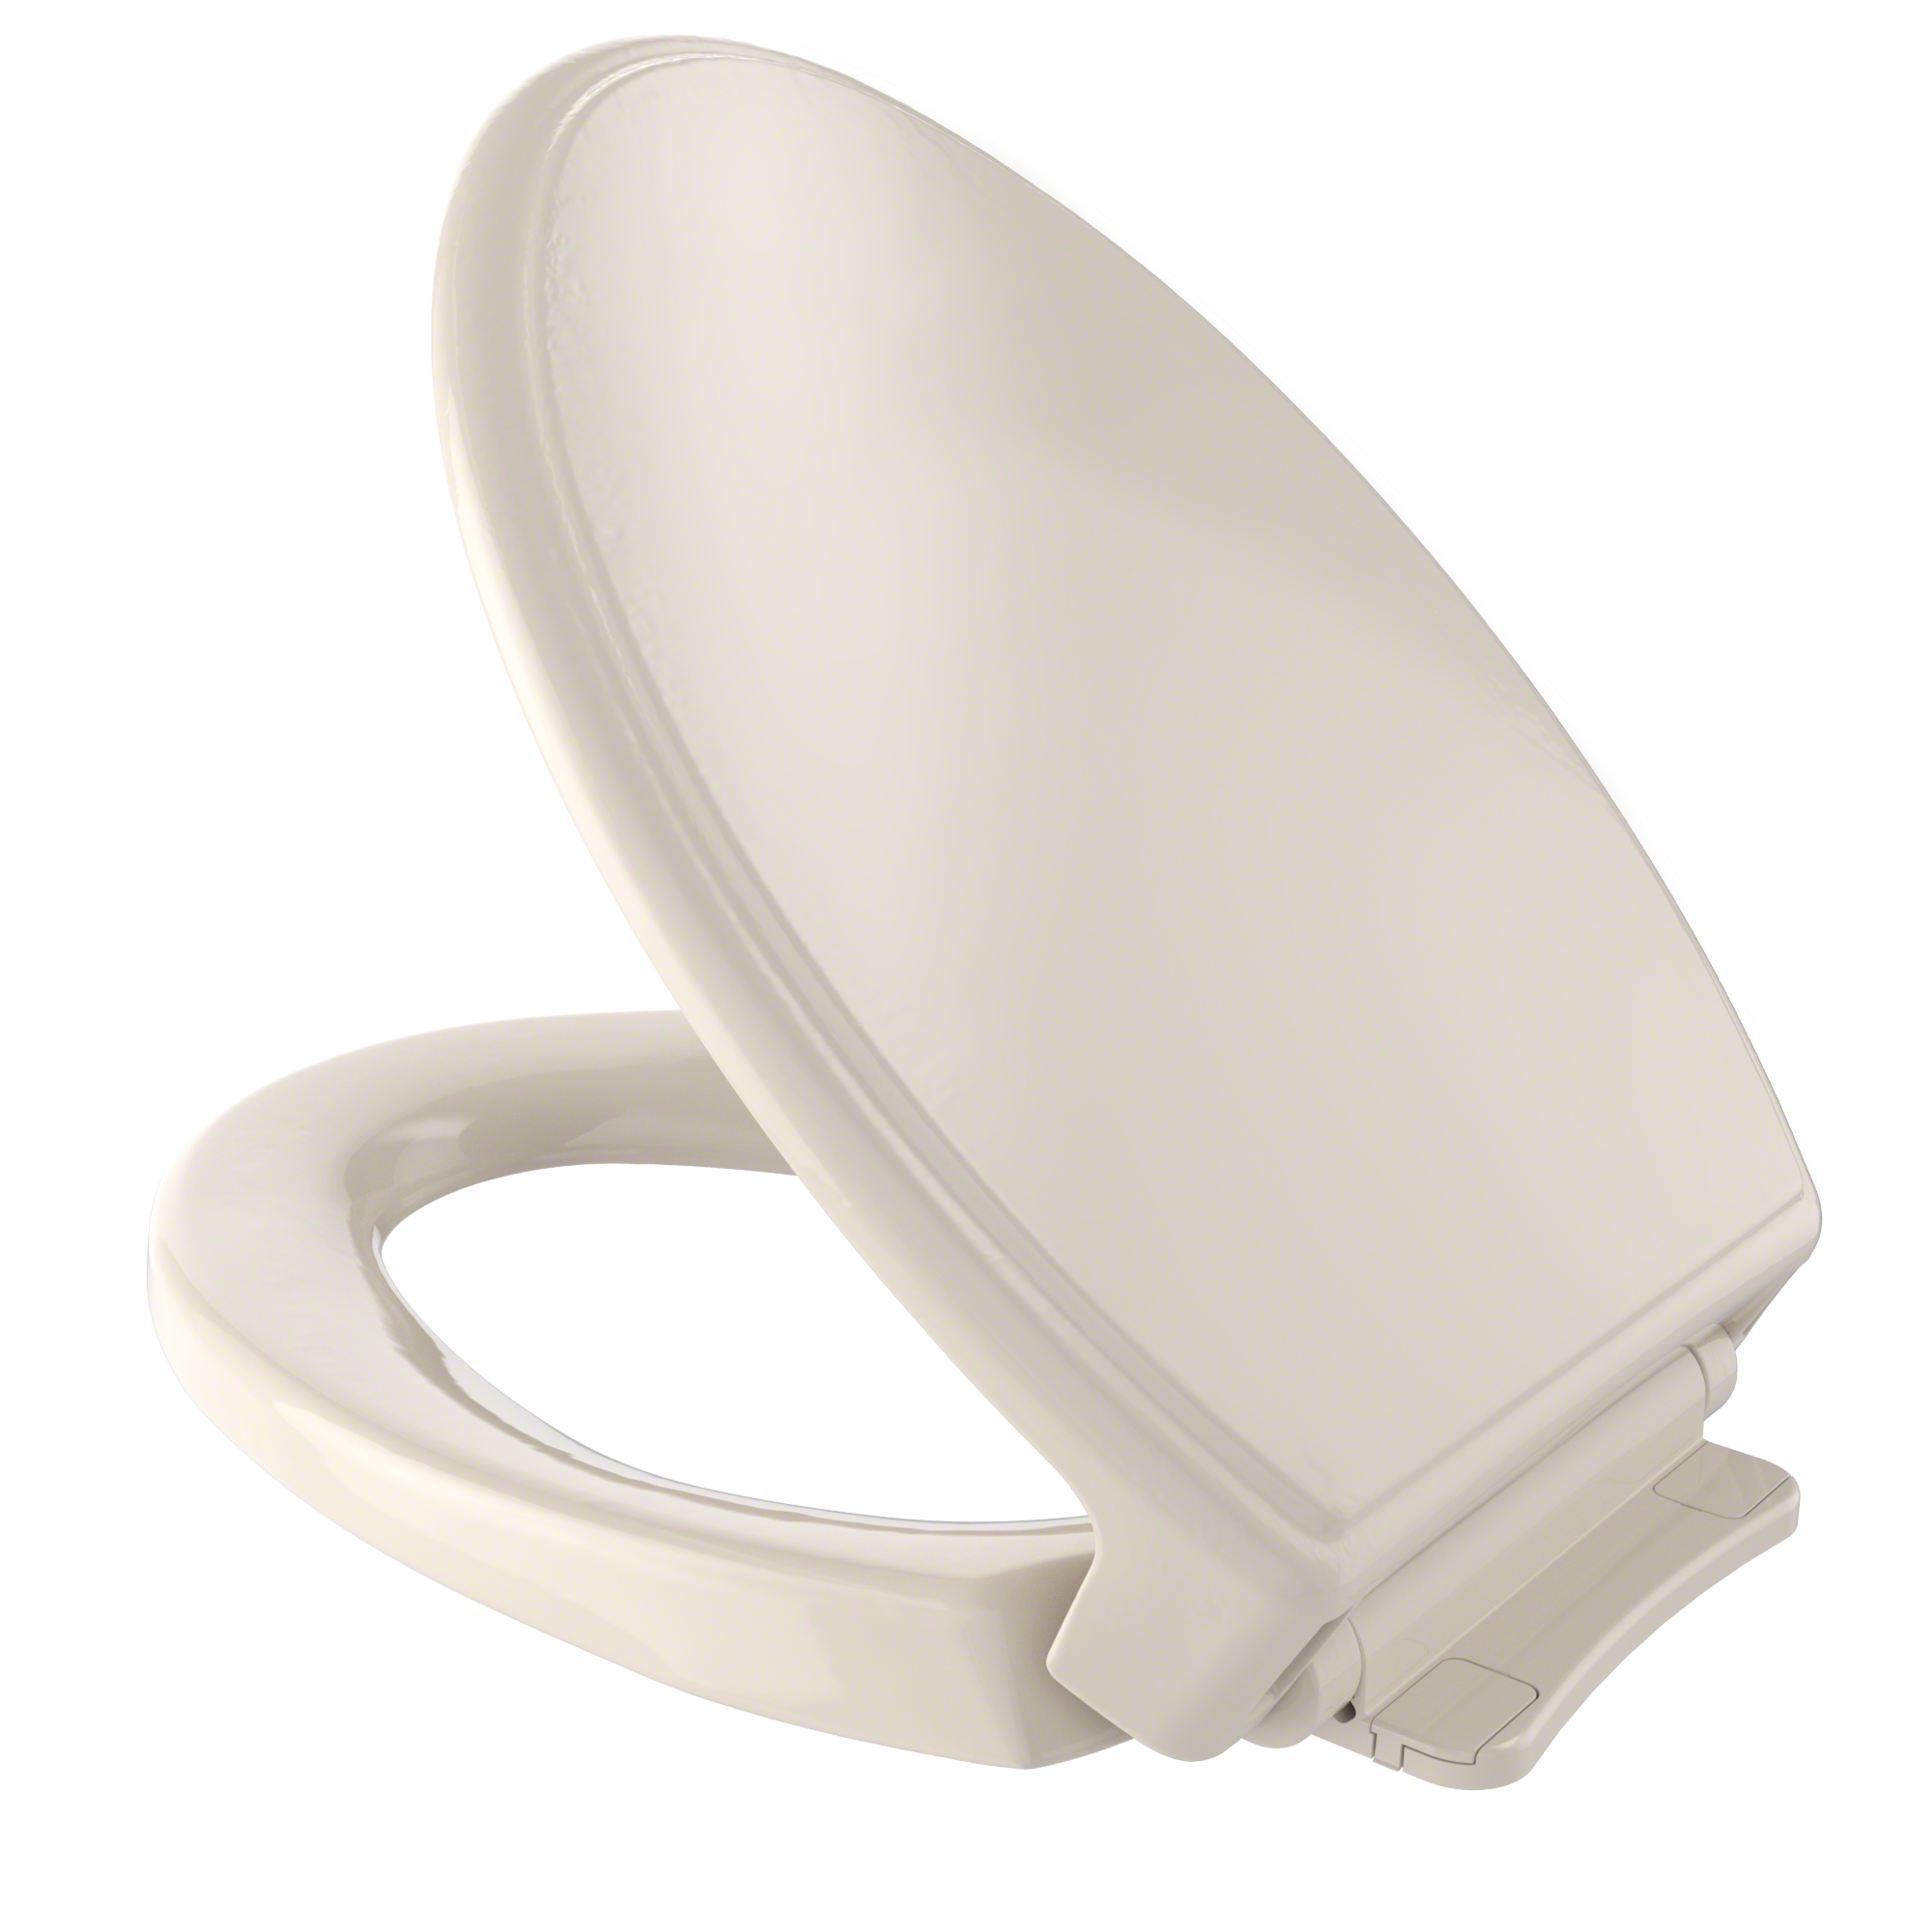 Toto Plastic Bone Elongated Soft Close Toilet Seat In The Toilet Seats